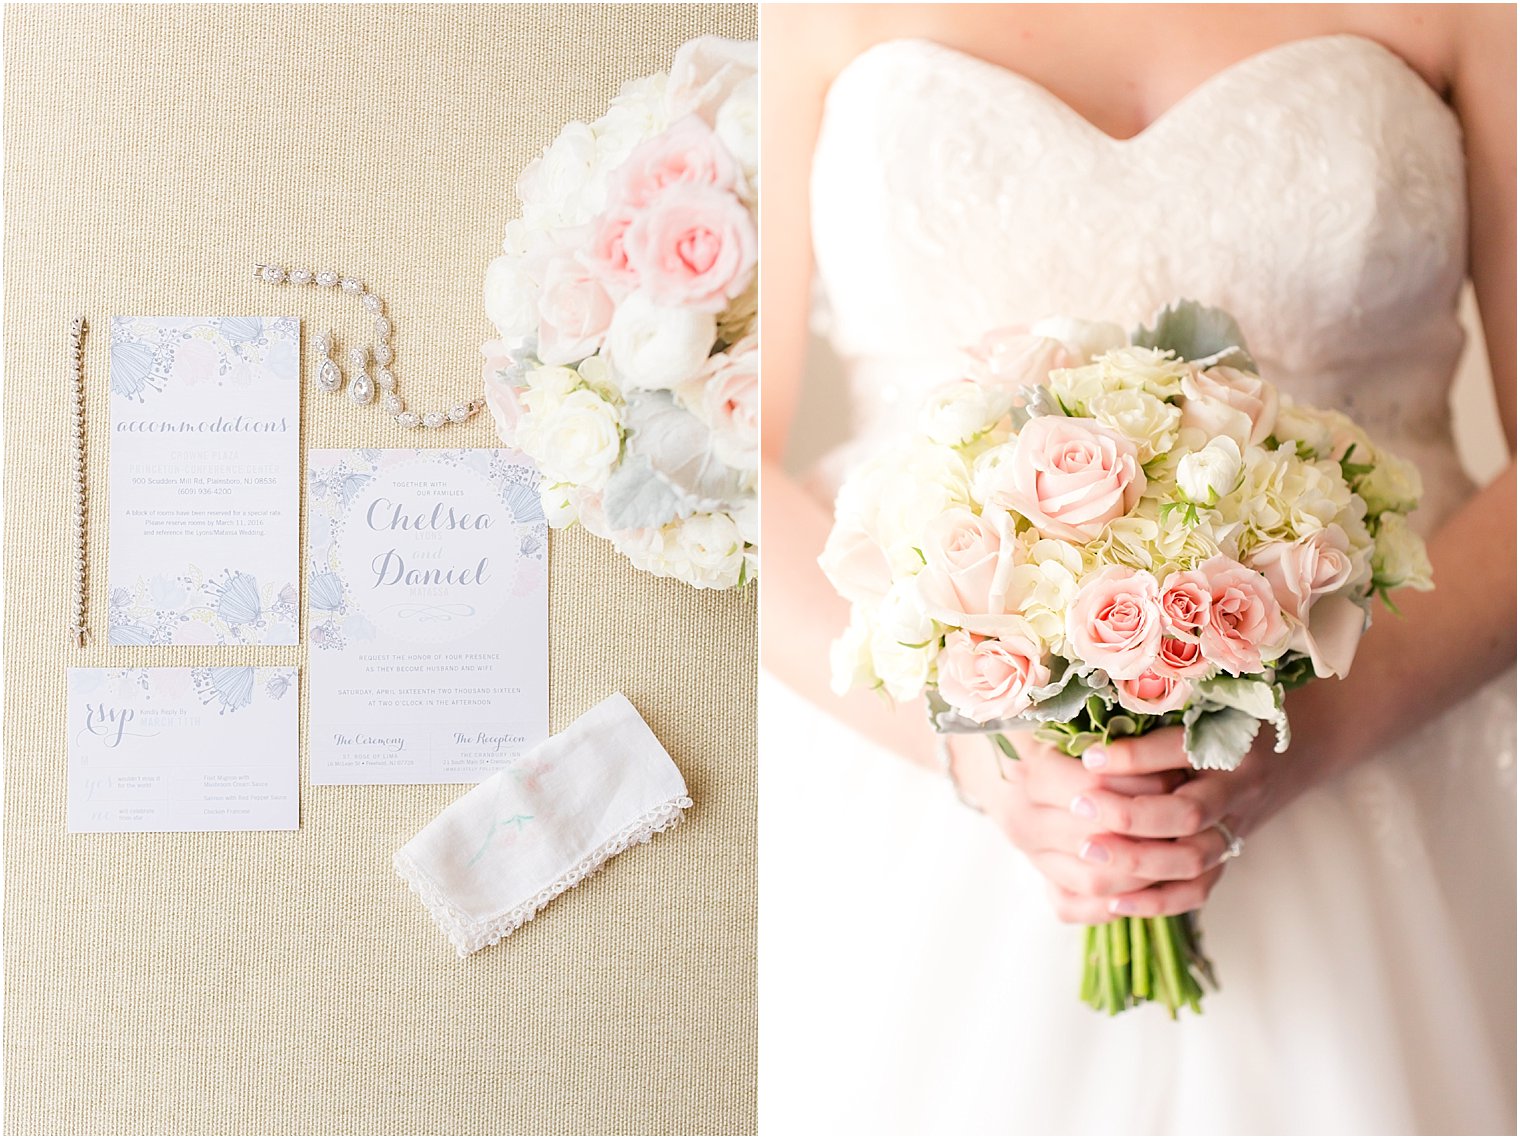 Invitations by Honeybliss Design | Florals by Monday Morning Flower & Balloon Co.